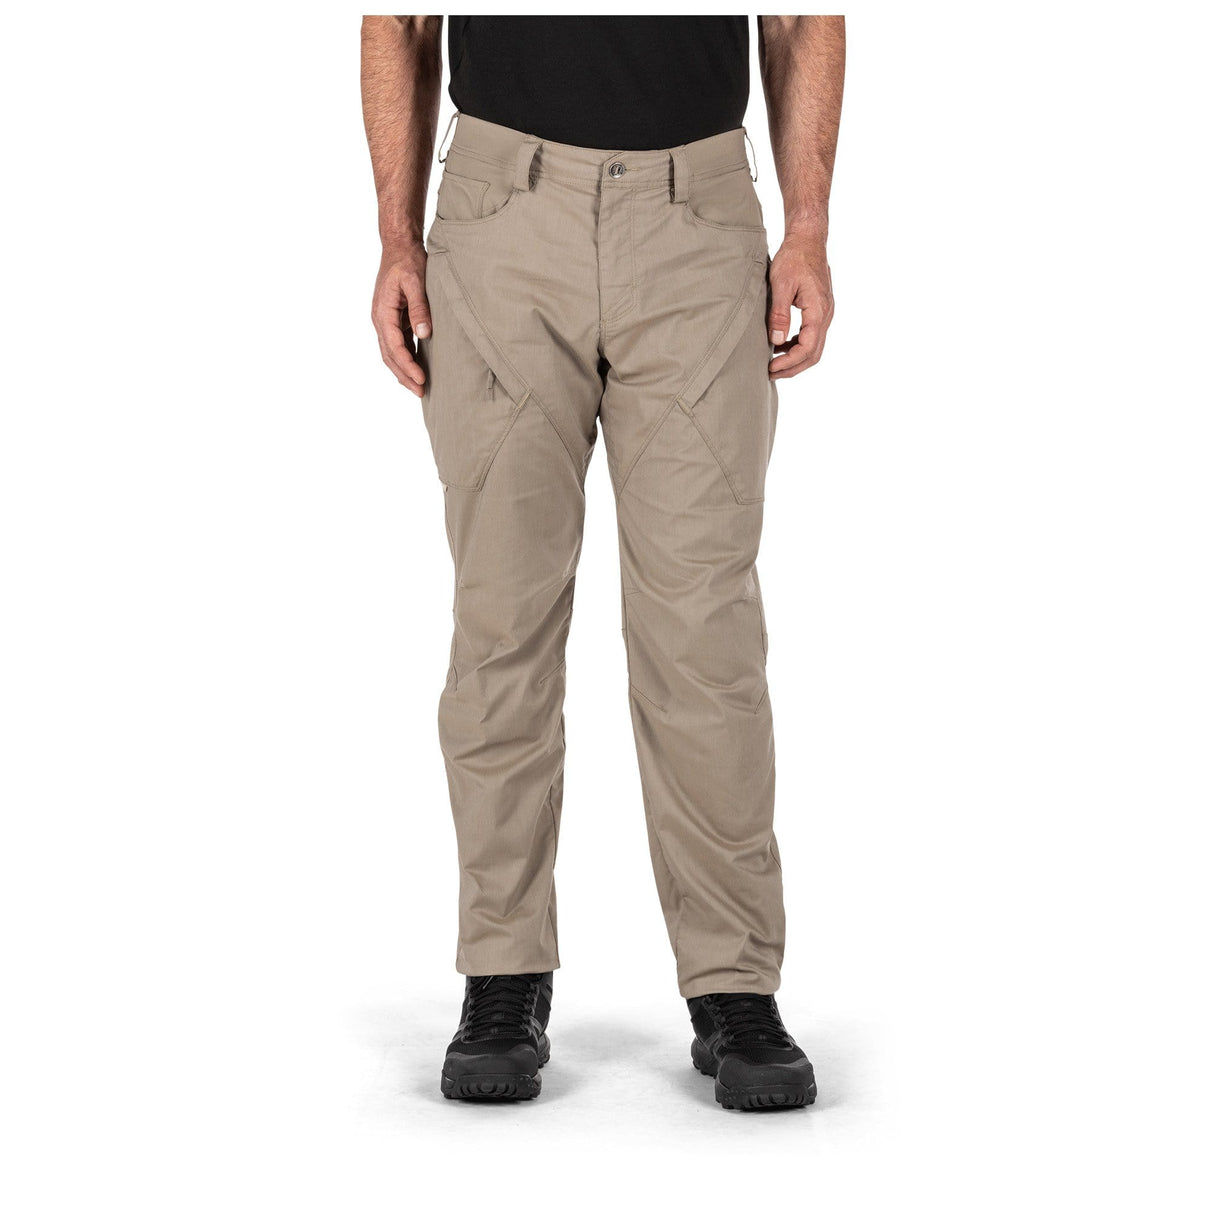 CAPITAL PANT STONE - 5.11 Tactical Finland Store